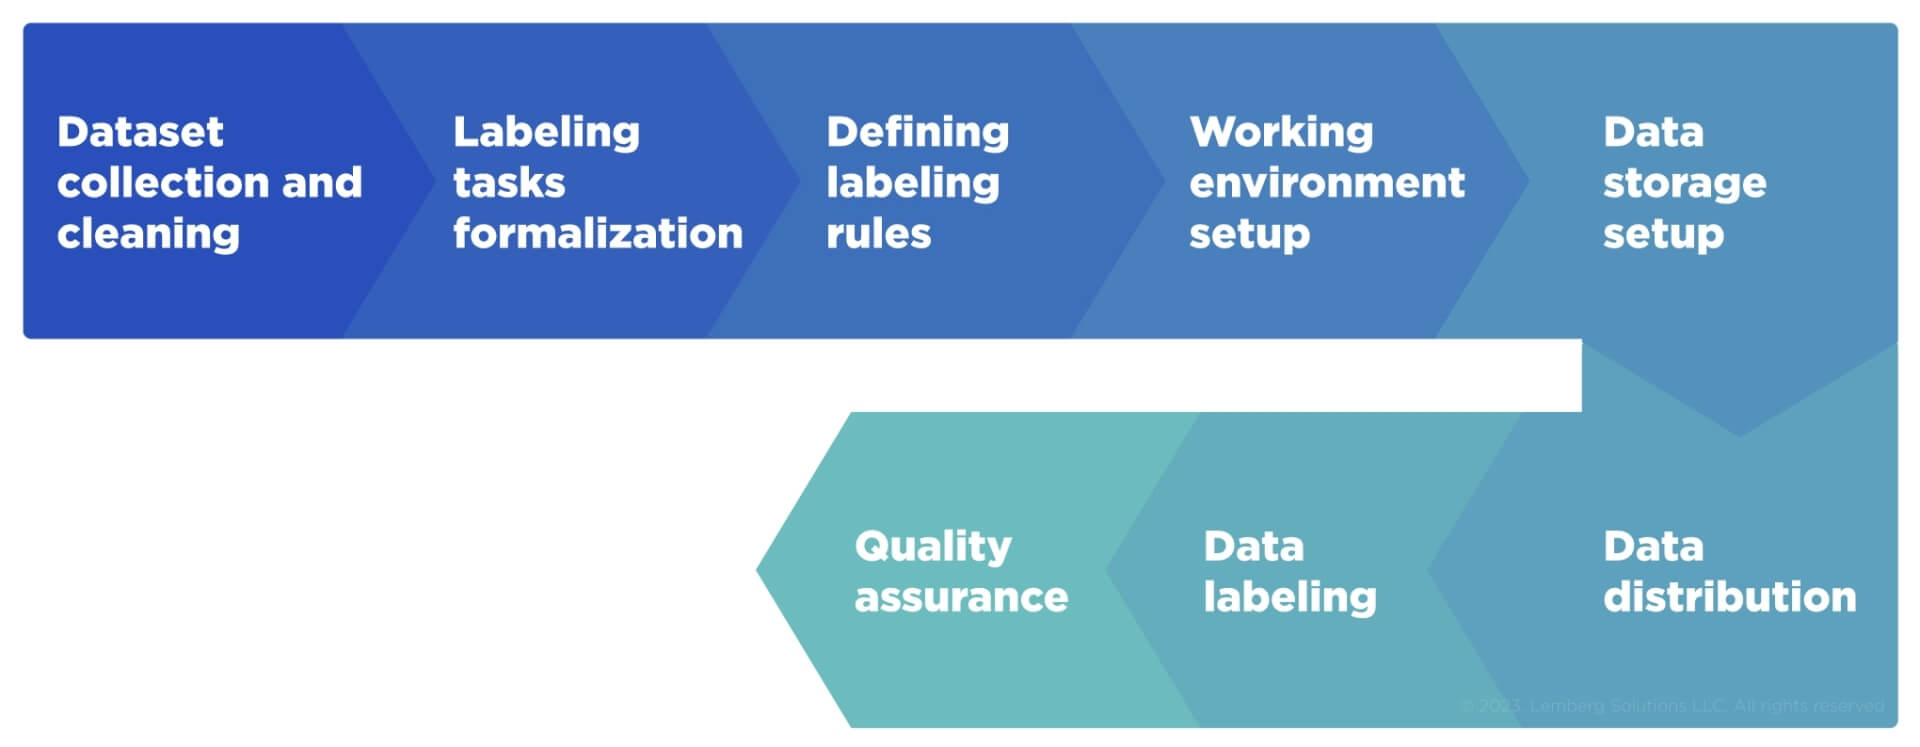 Process - Data labeling in 8 steps_ How we do it - Lemberg Solutions.jpg